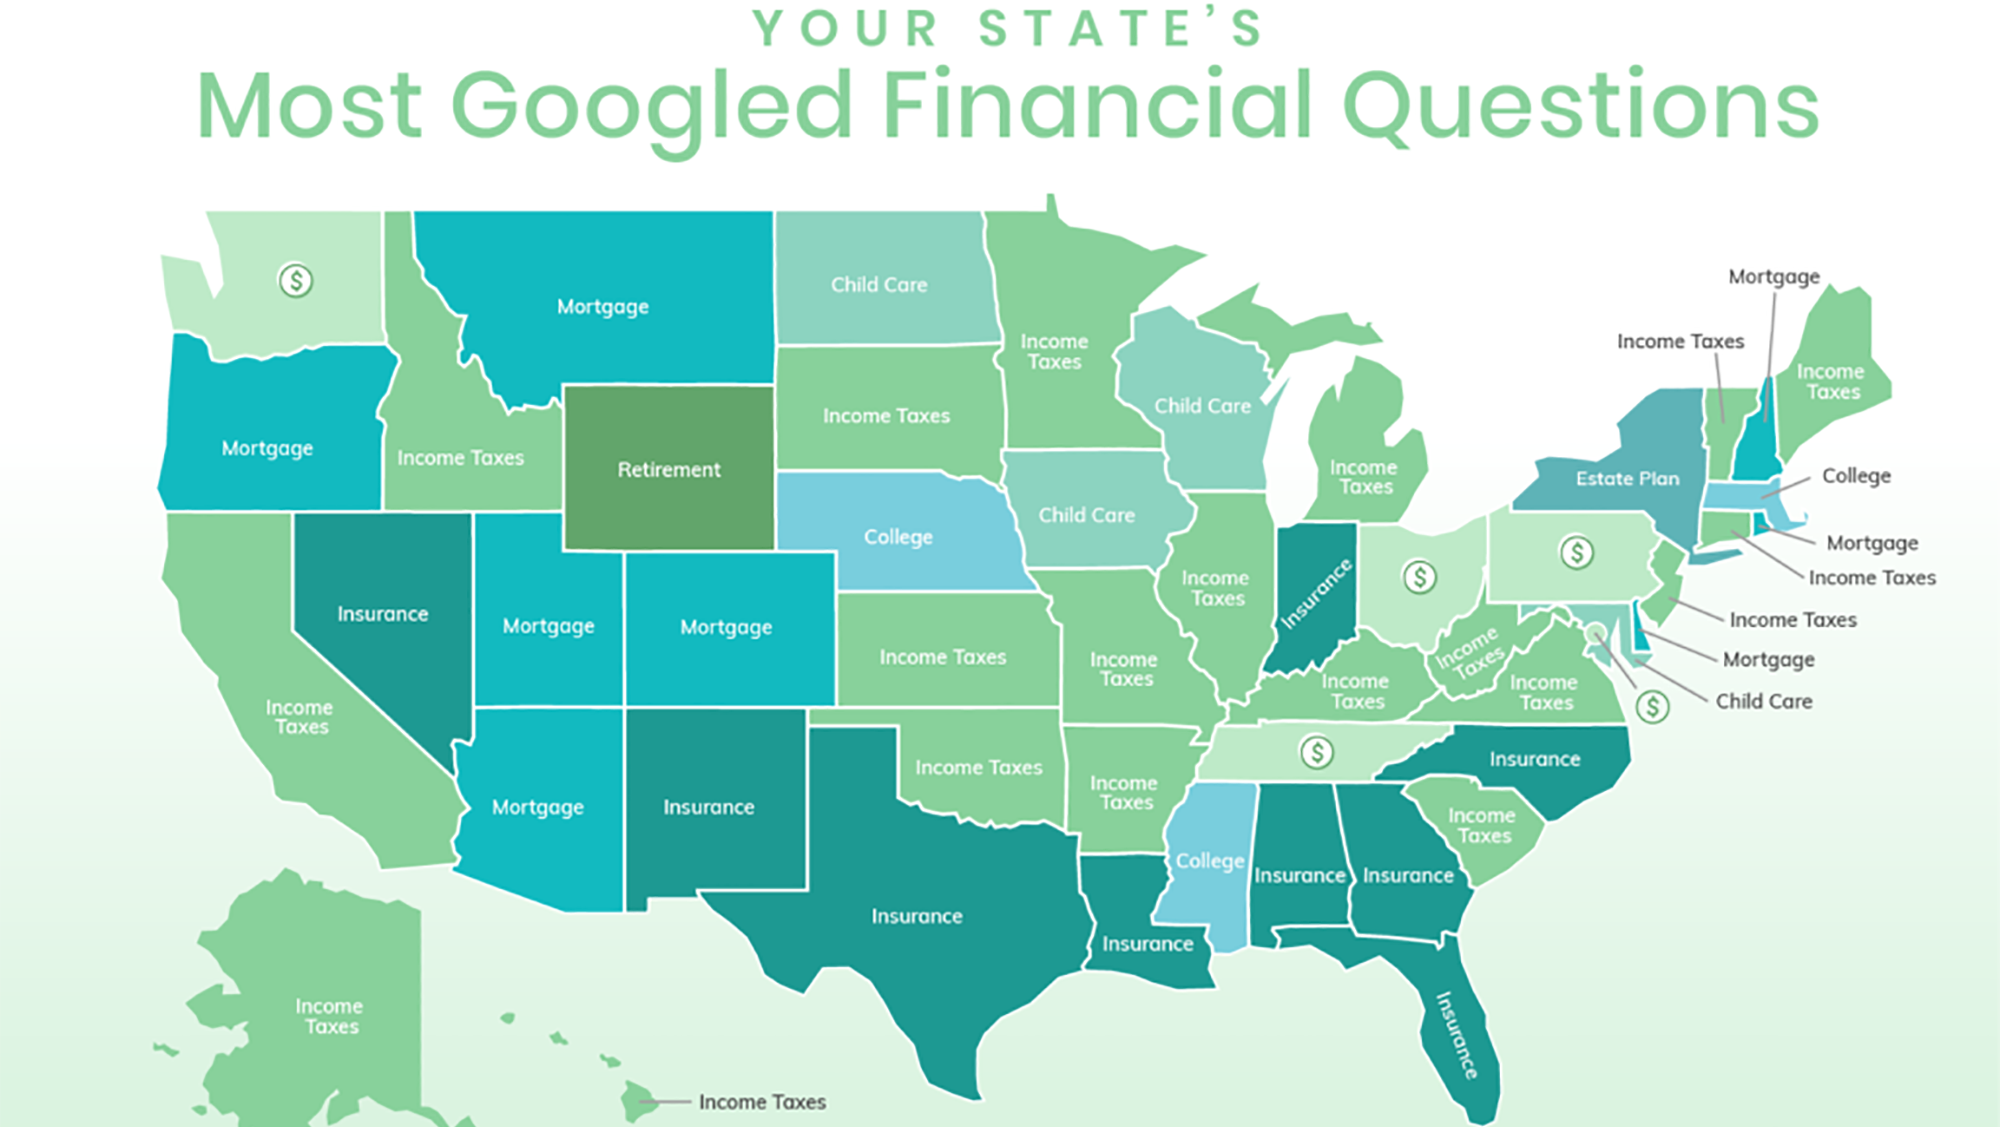 The Seven MostGoogled Financial Topics in the United States Wealth